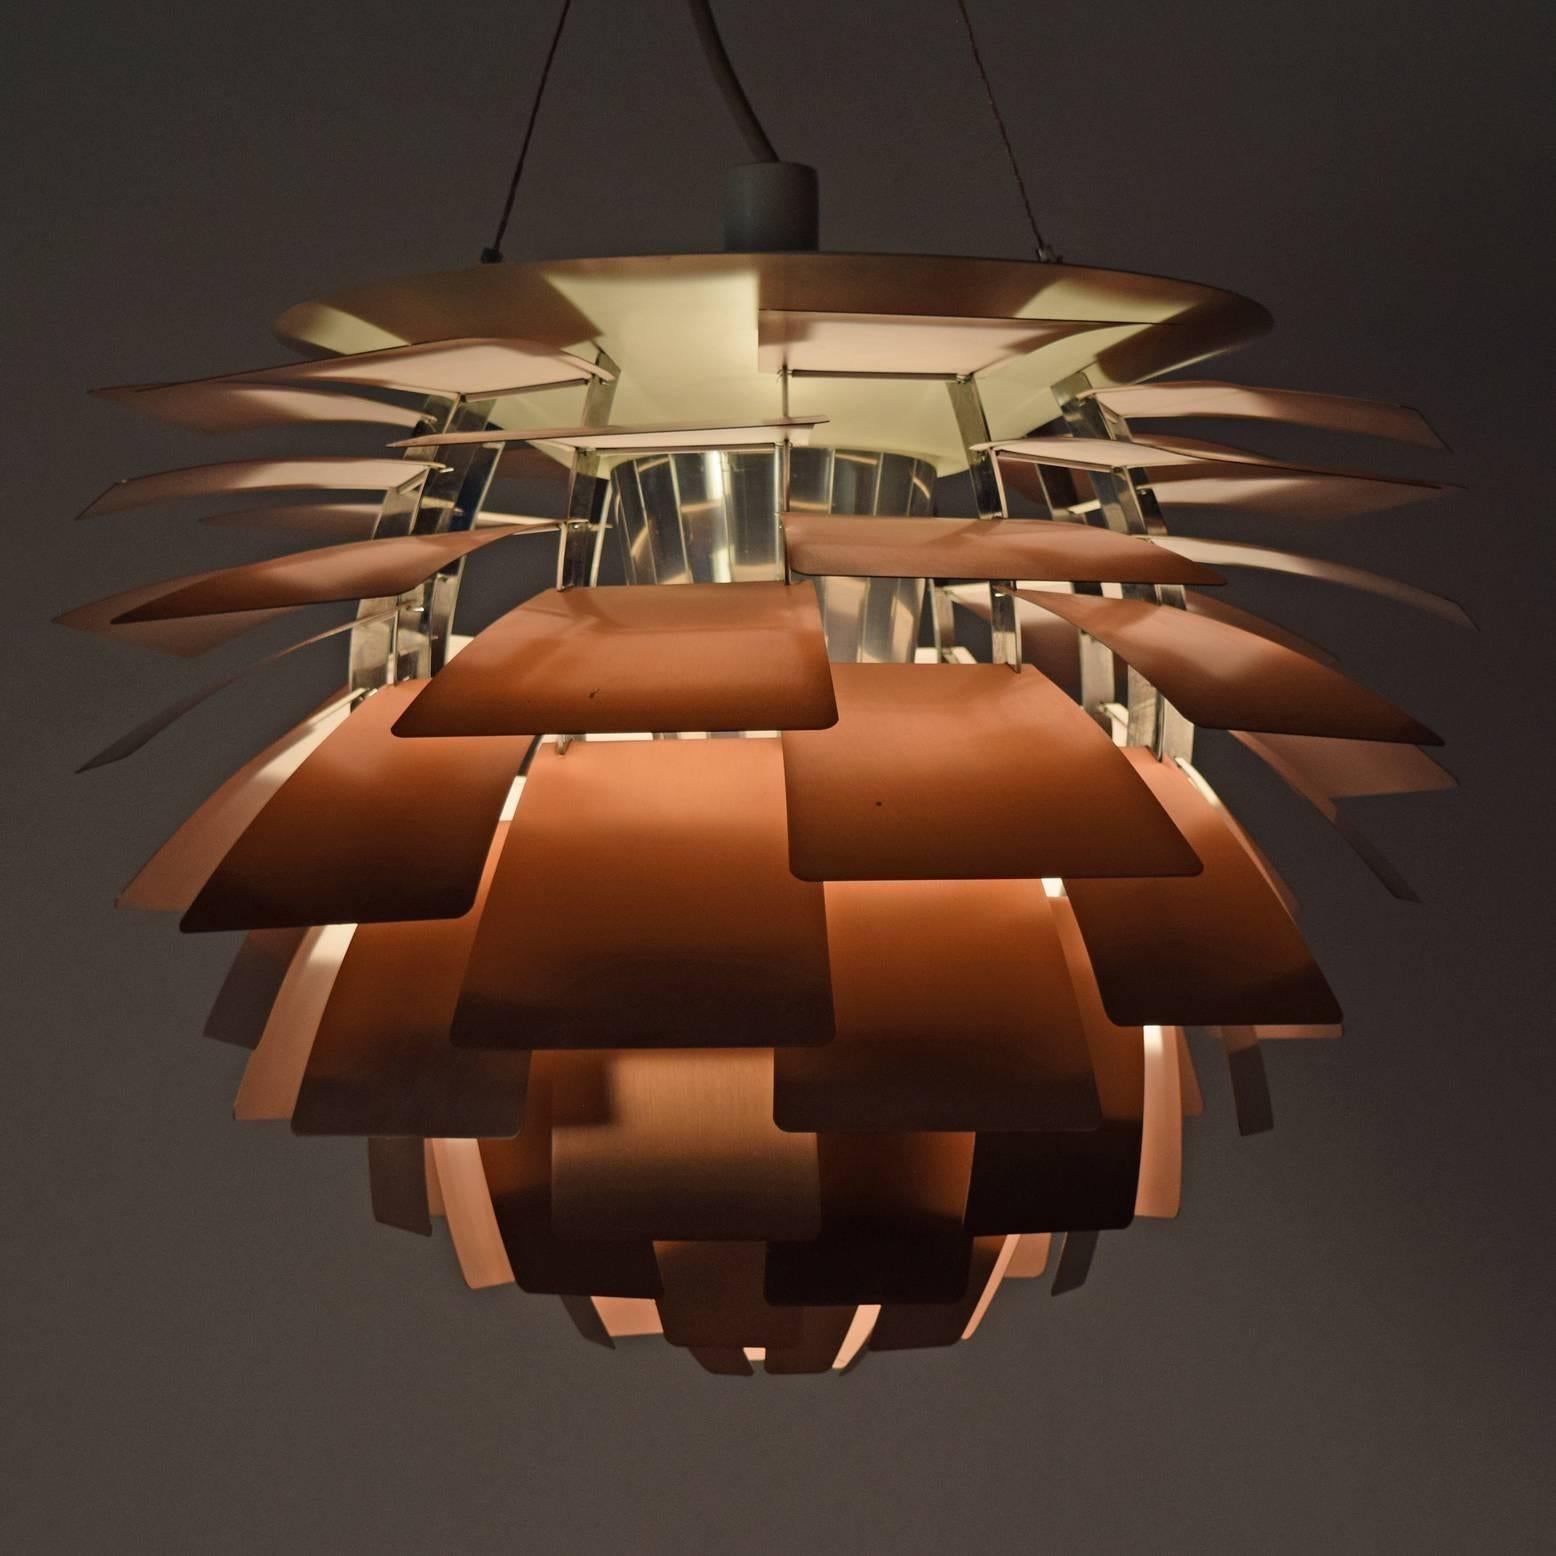 Iconic pendant lamp with solid copper leaves, very light pink enamel paint under leaves (the mark of an early production). Polished chrome socket housing and ribs. Can suspend 17'
Retains label. Made by Louis Poulsen.